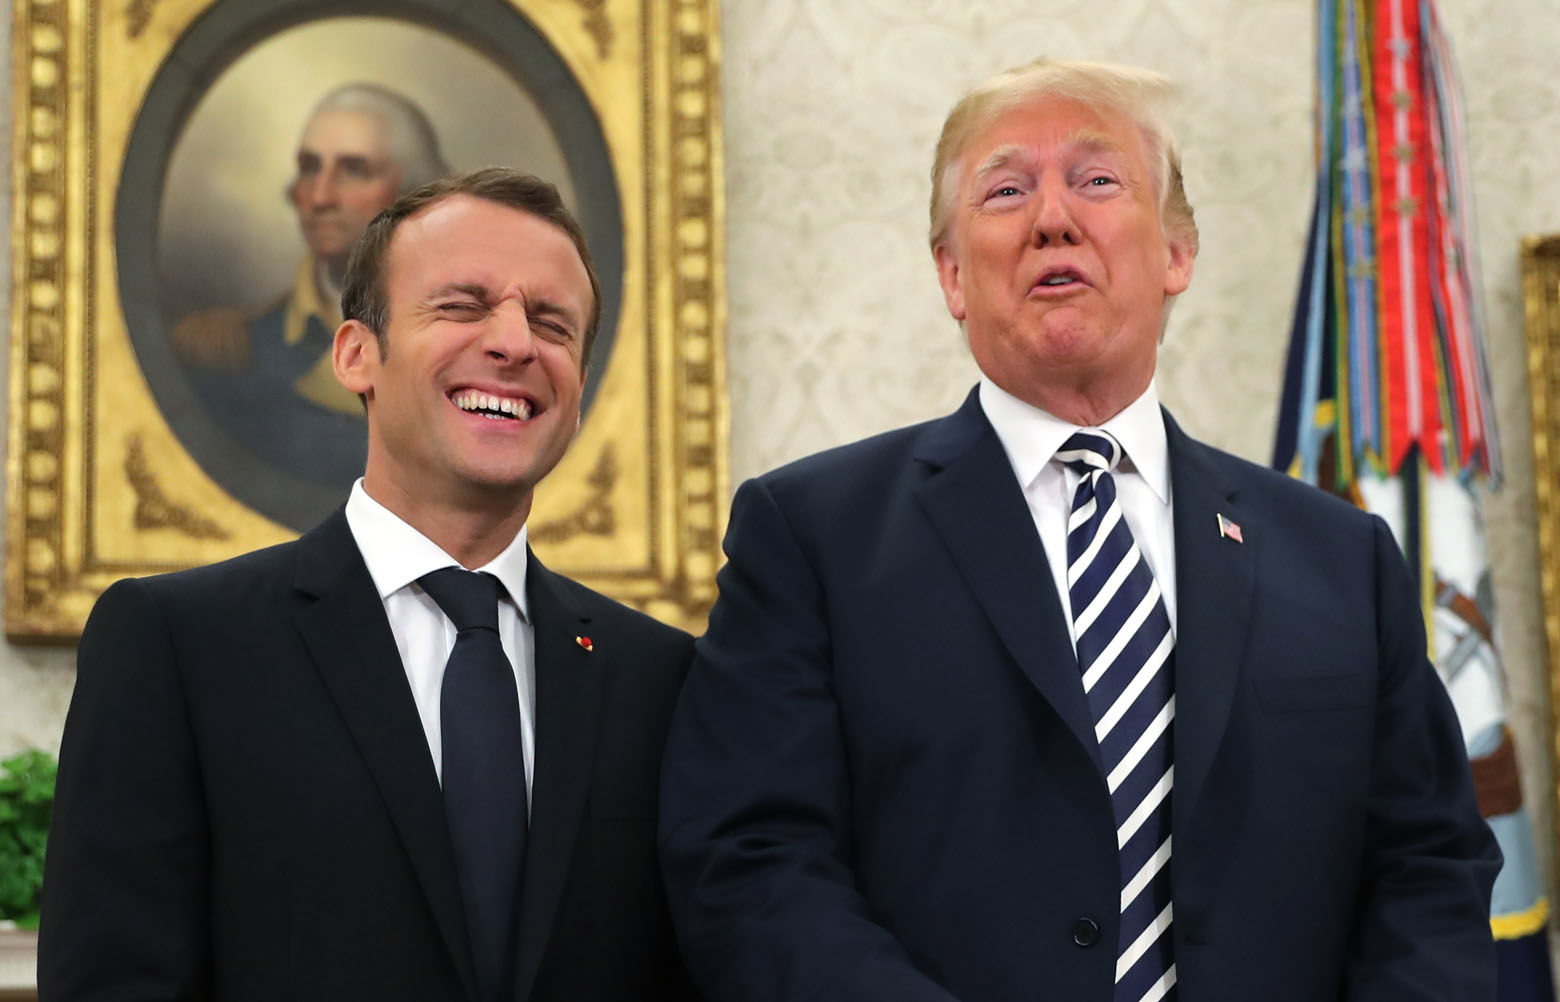 President Donald Trump and French President Emmanuel Macron talk to the media at the beginning or their in Oval Office of the White House in Washington, Tuesday, April 24, 2018. (AP Photo/Pablo Martinez Monsivais)